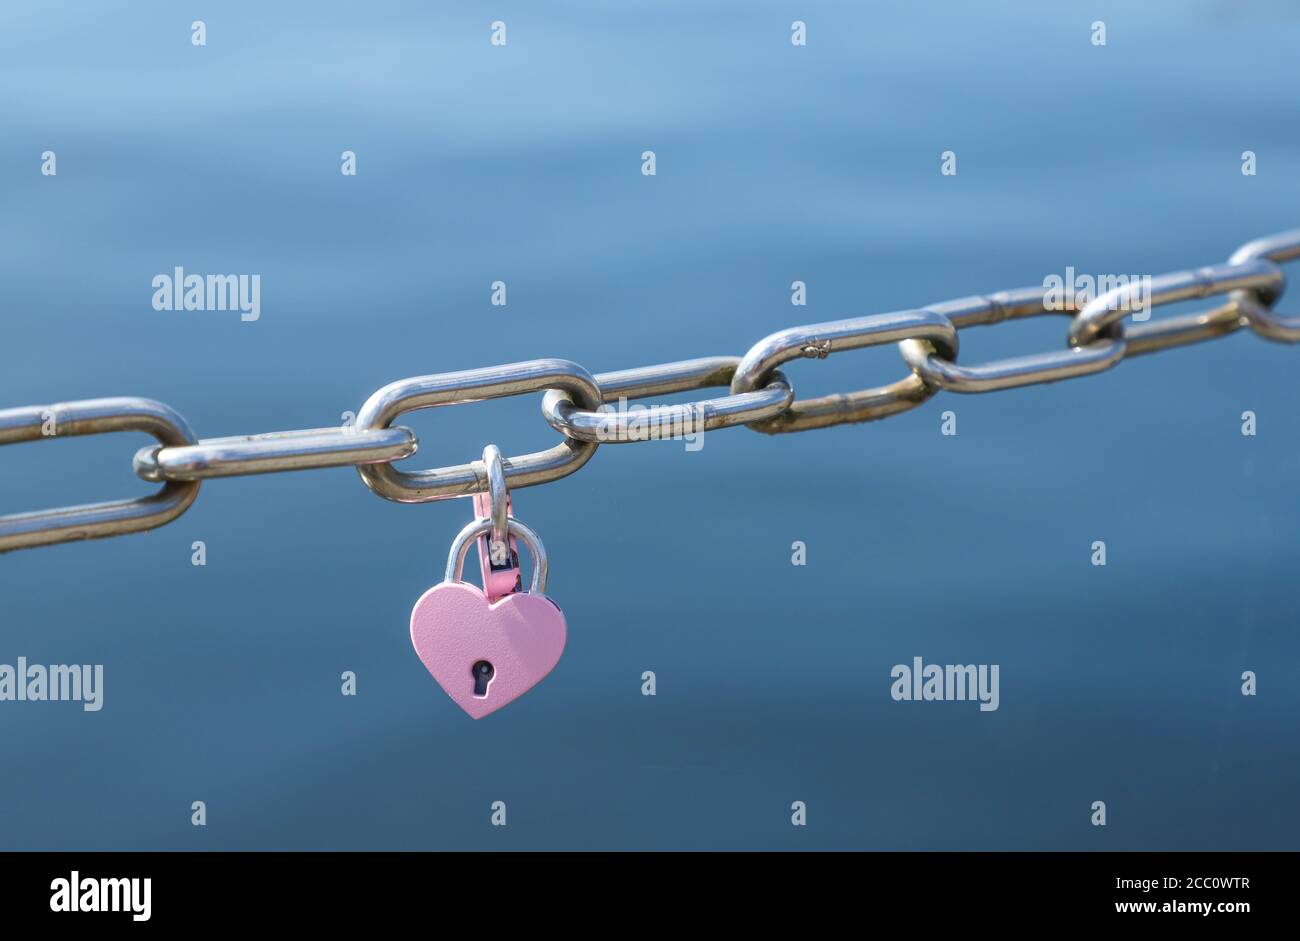 Love padlocks in pink hanging on metal chain fence Stock Photo